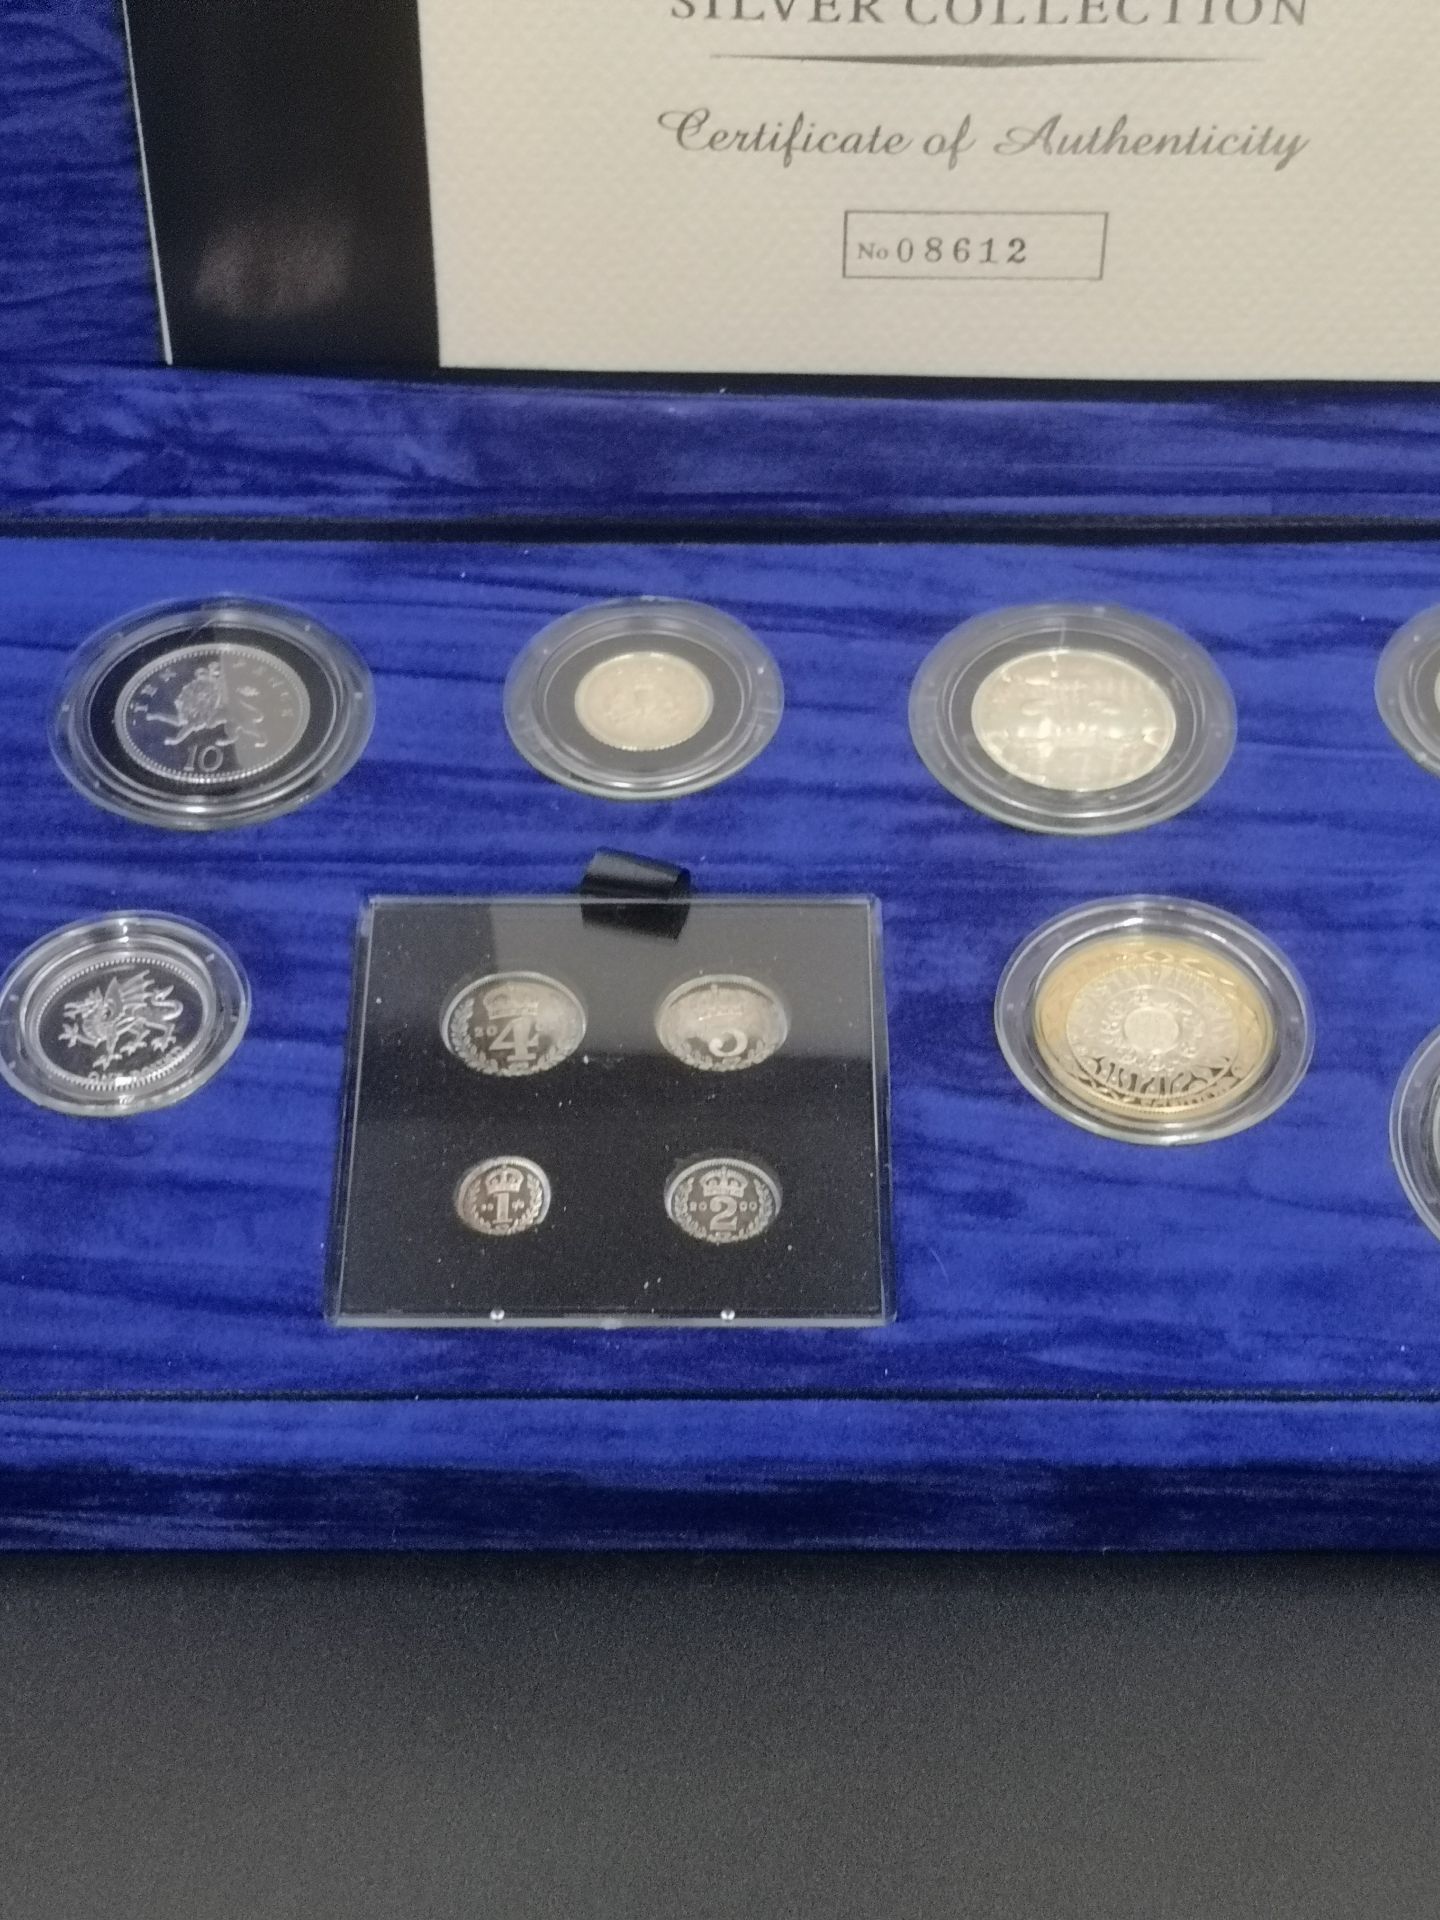 Royal Mint UK Millenium silver coin collection - Image 4 of 6